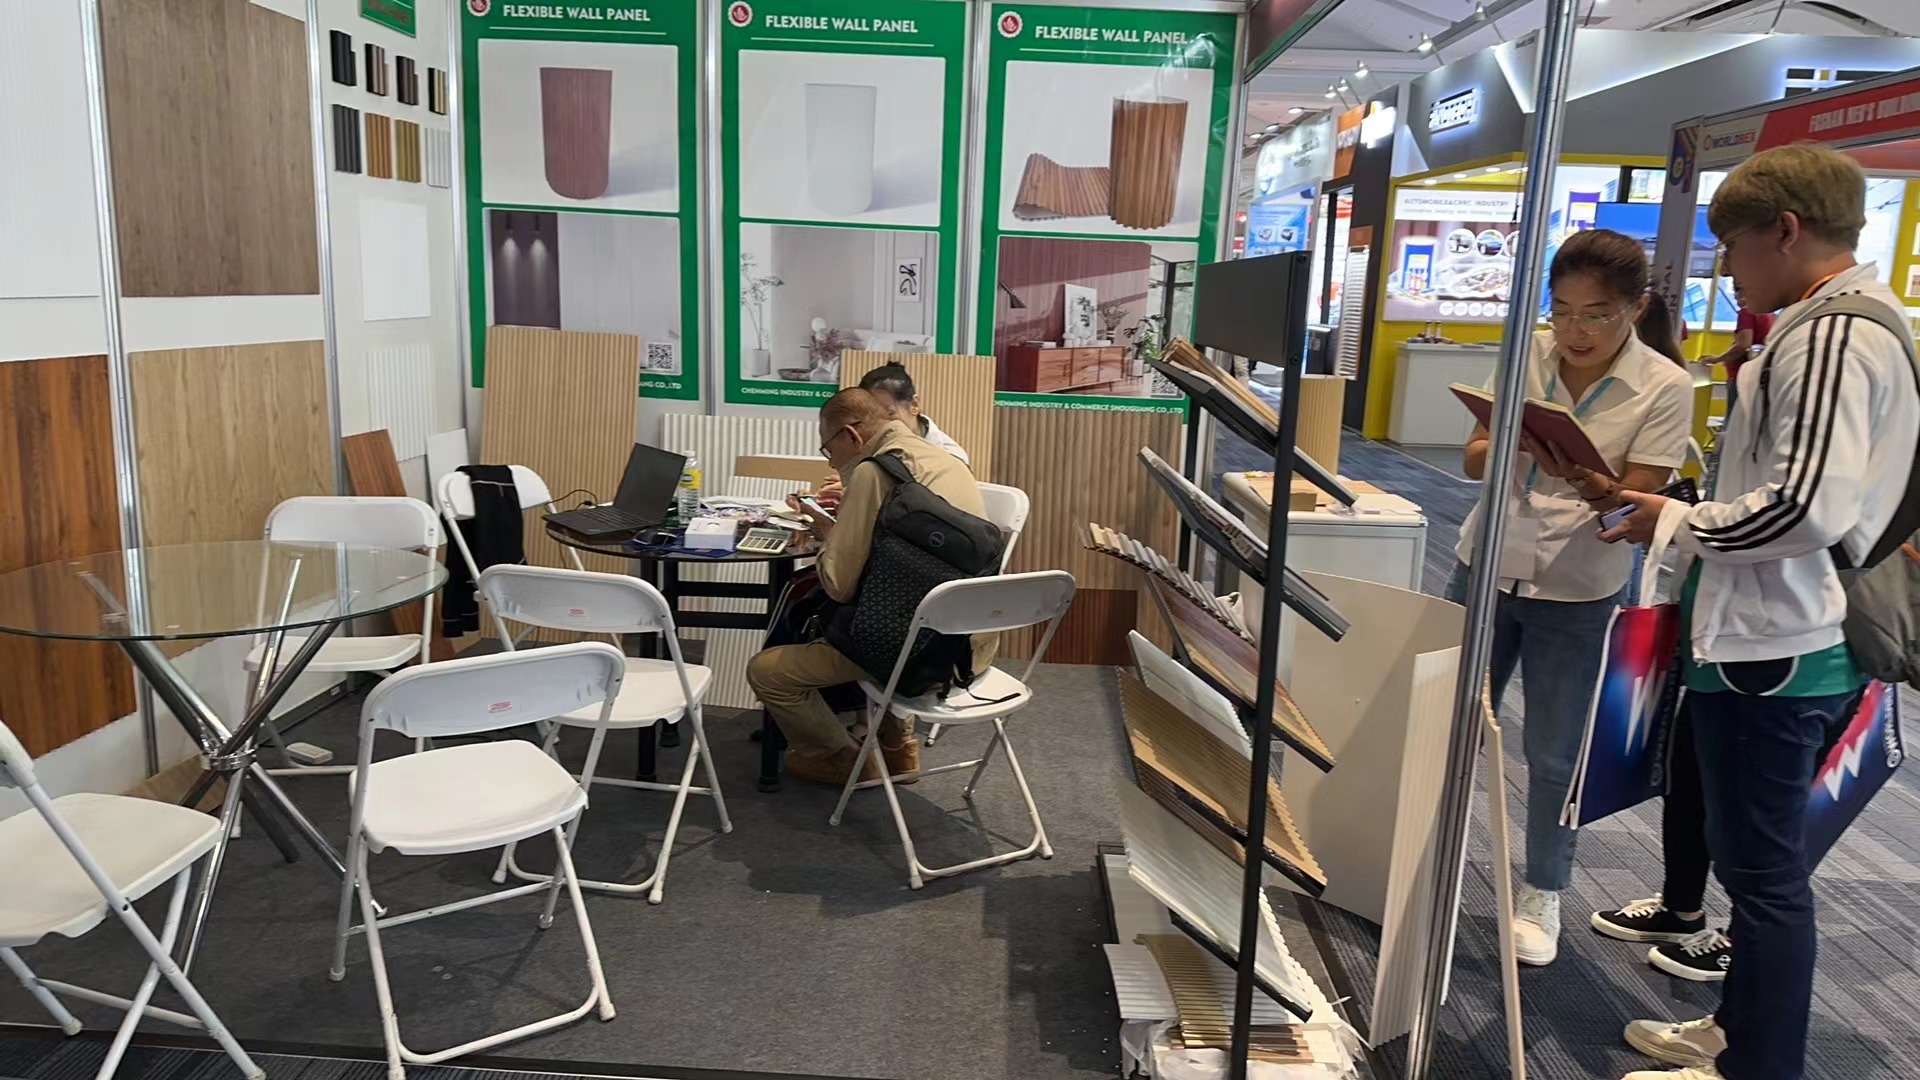 Our company participated in the Philippine Building Materials Exhibition and gained a lot of benefits.